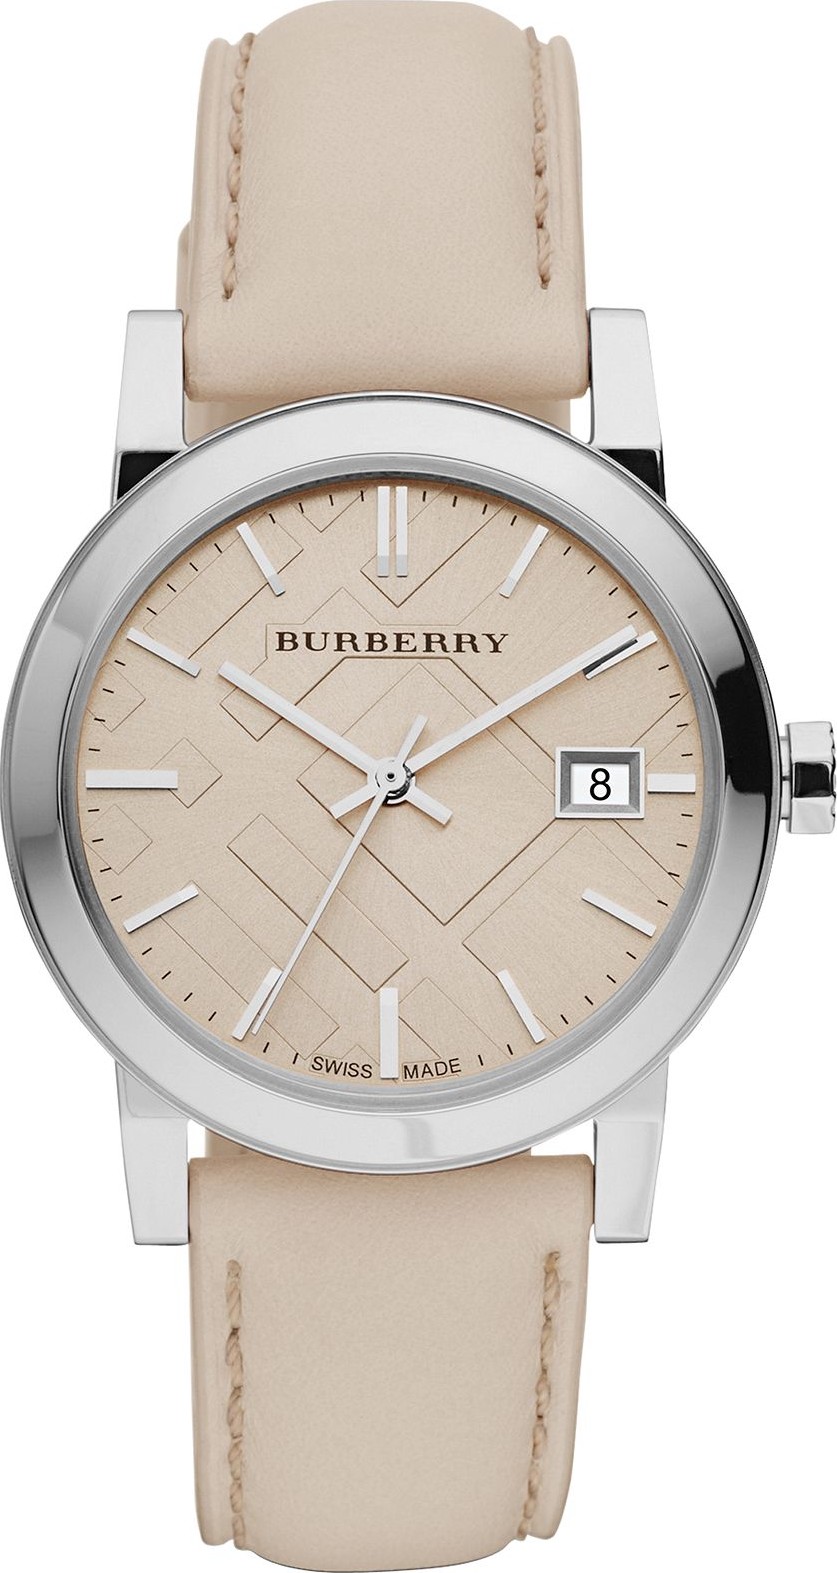 Dong-ho-burberry-women-s-swiss-leather-34mm2